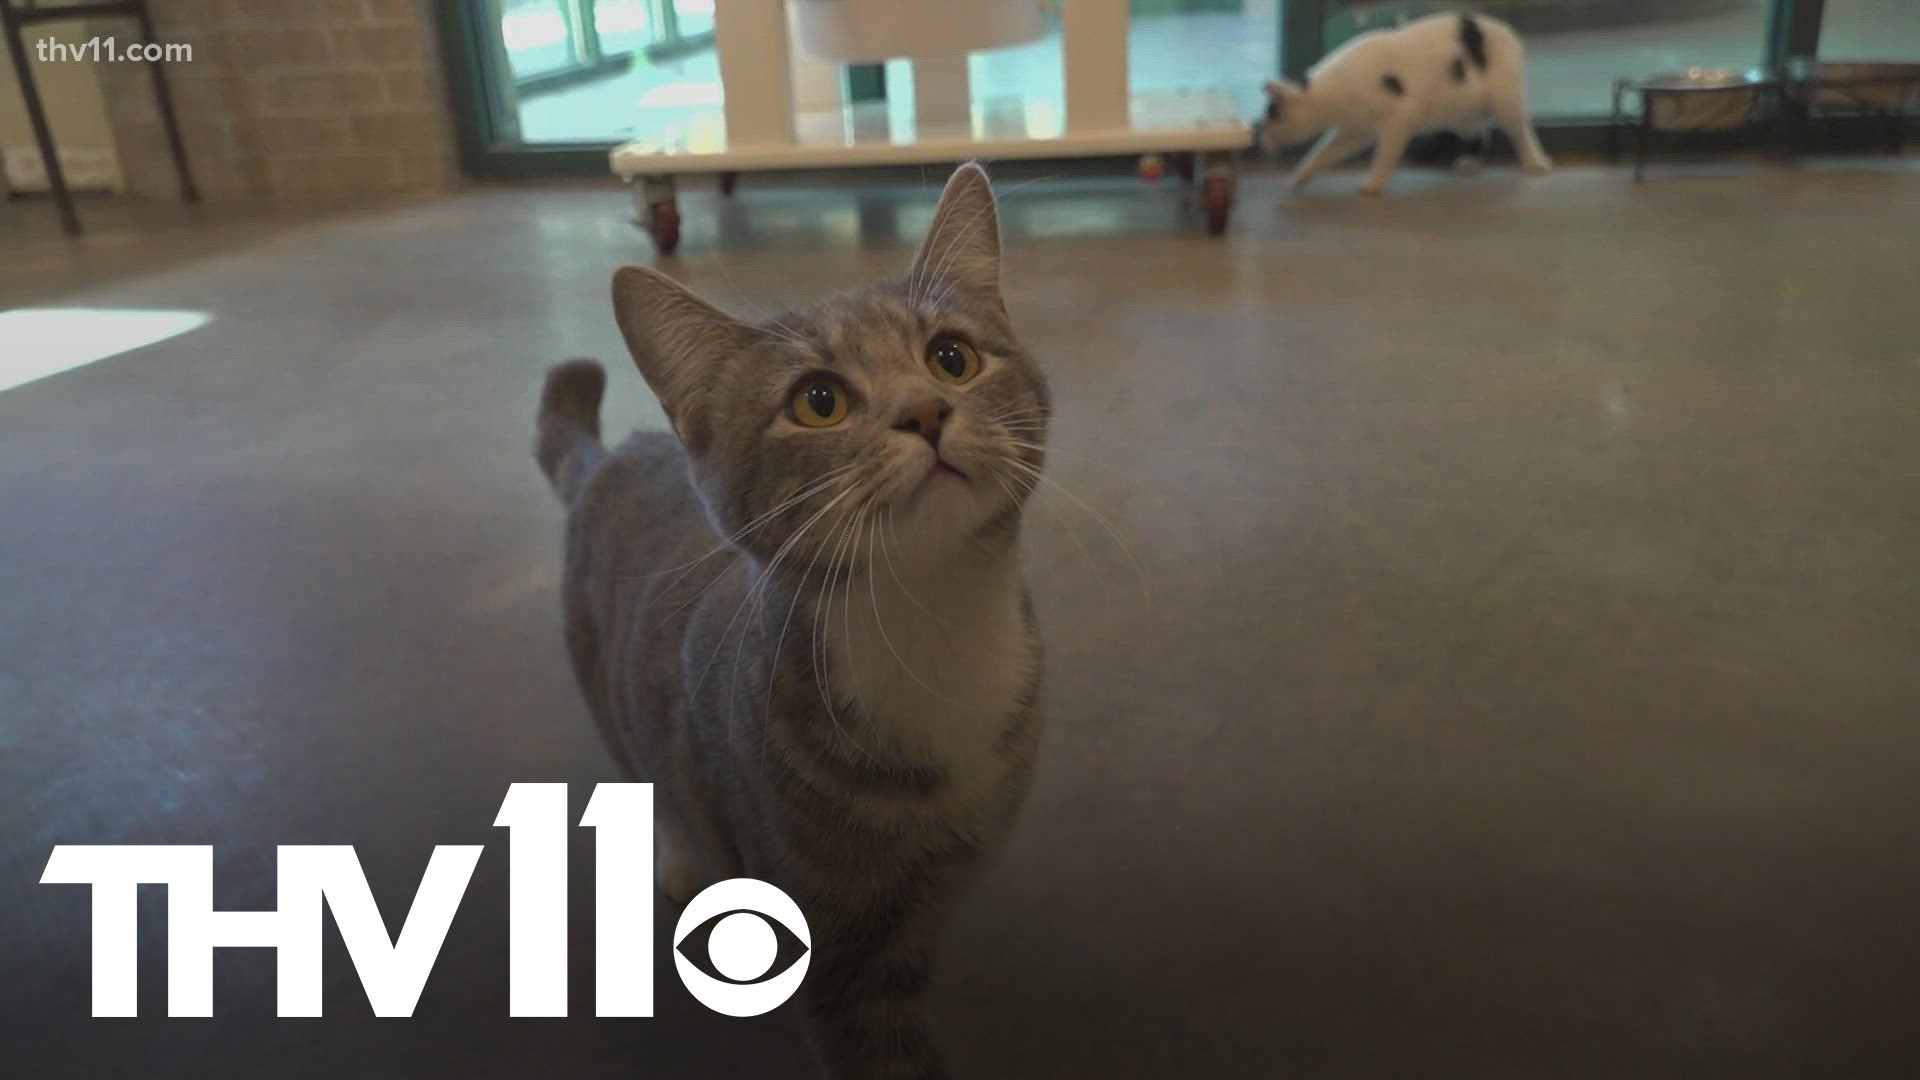 Little Rock Animal Village is waiving adoption fees for its animals, starting Dec. 8 until at least Saturday, Dec. 11th.